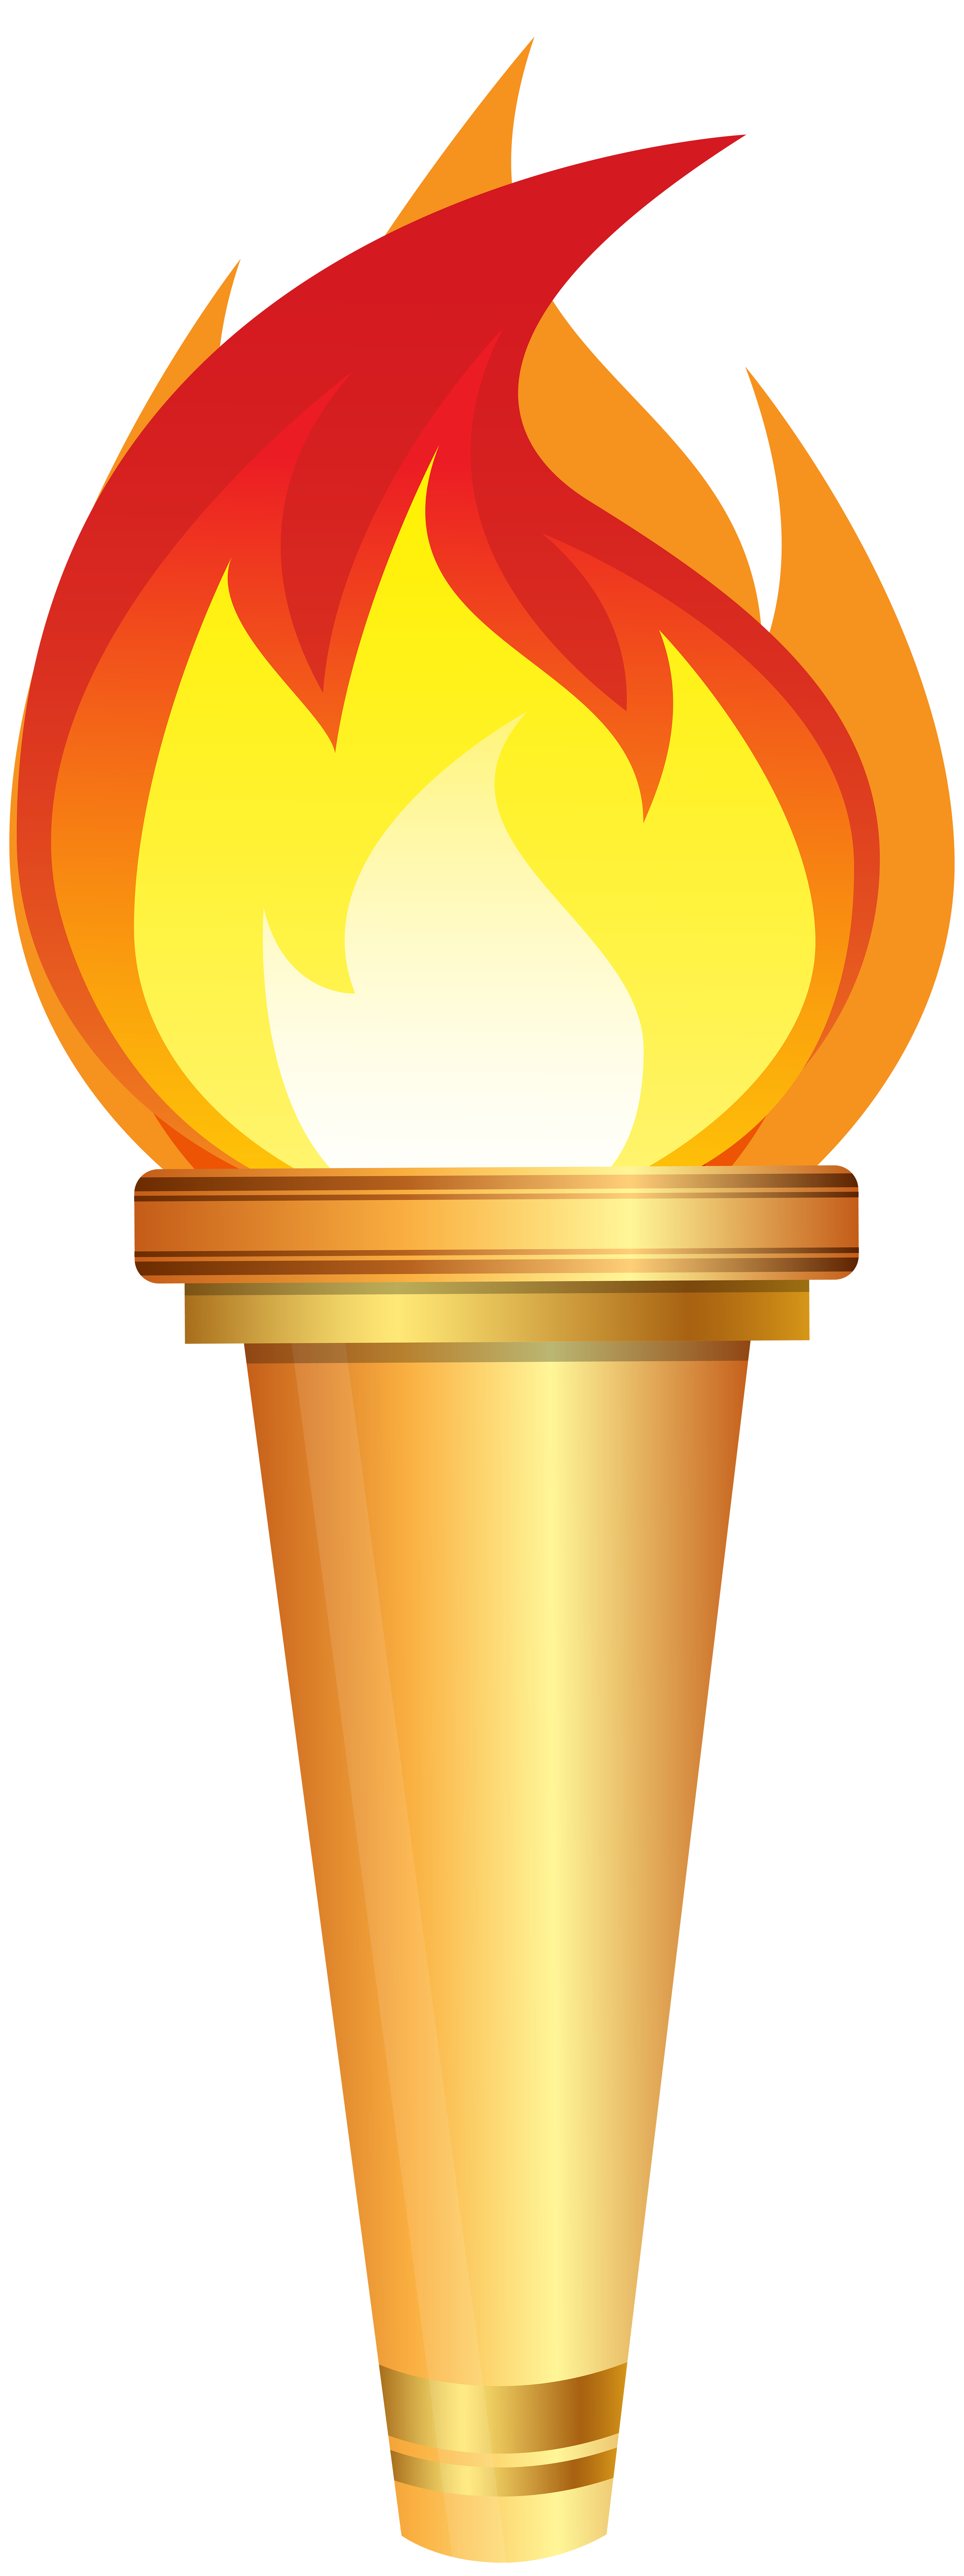 fire torch clipart - photo #32